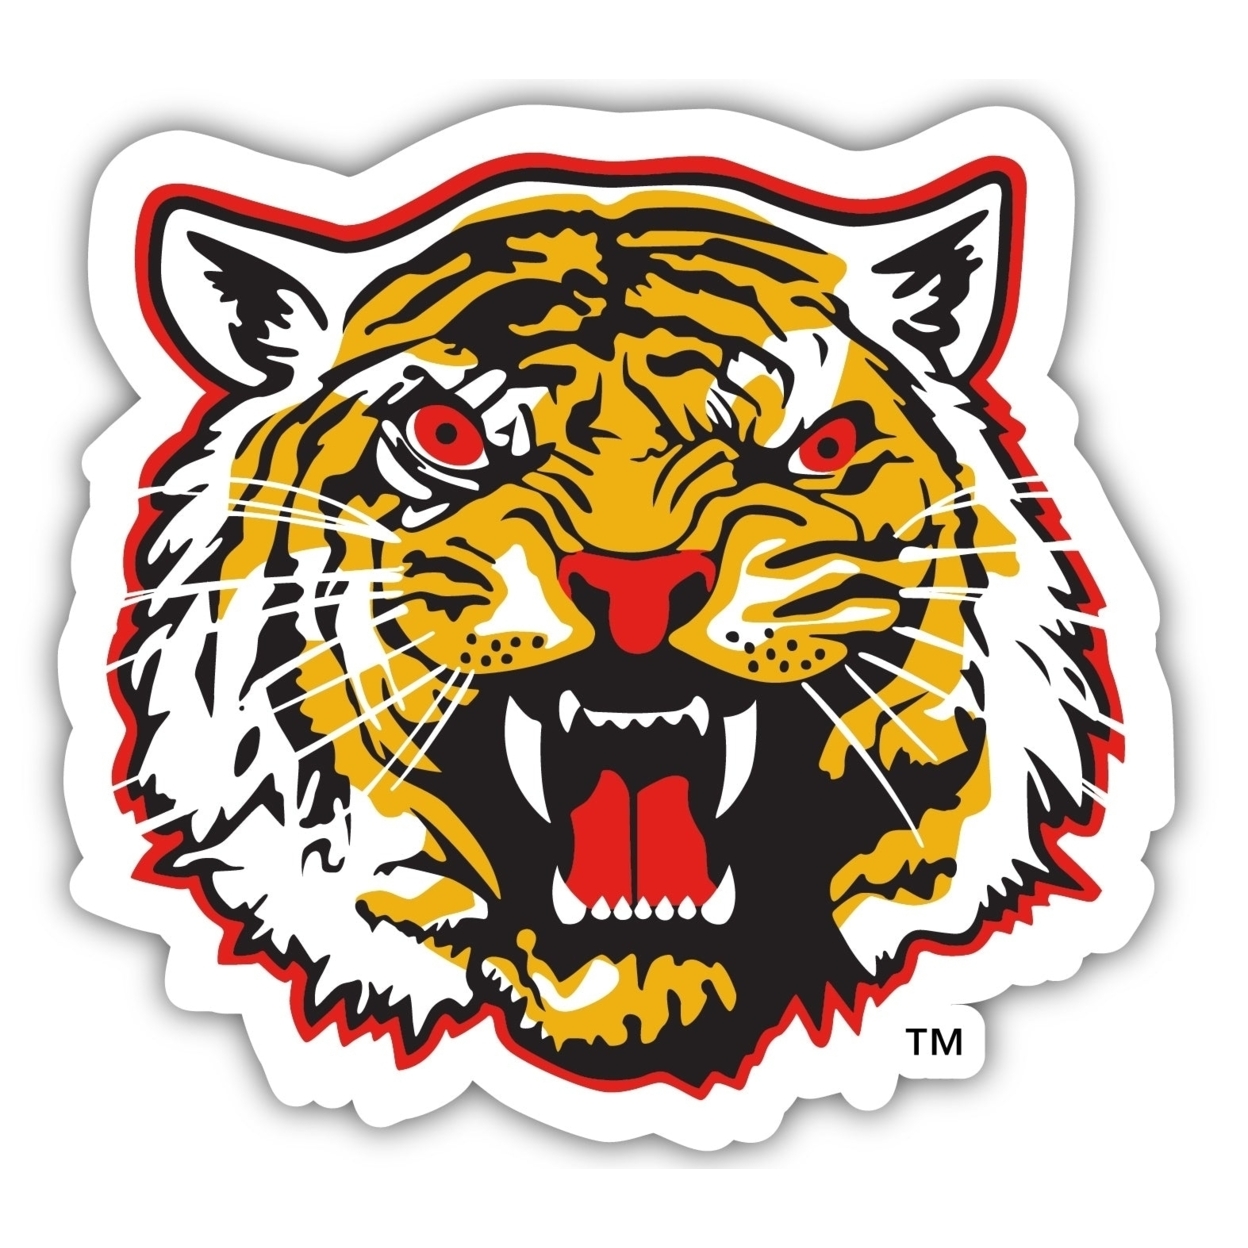 Grambling State Tigers 10 Inch Vinyl Decal Sticker